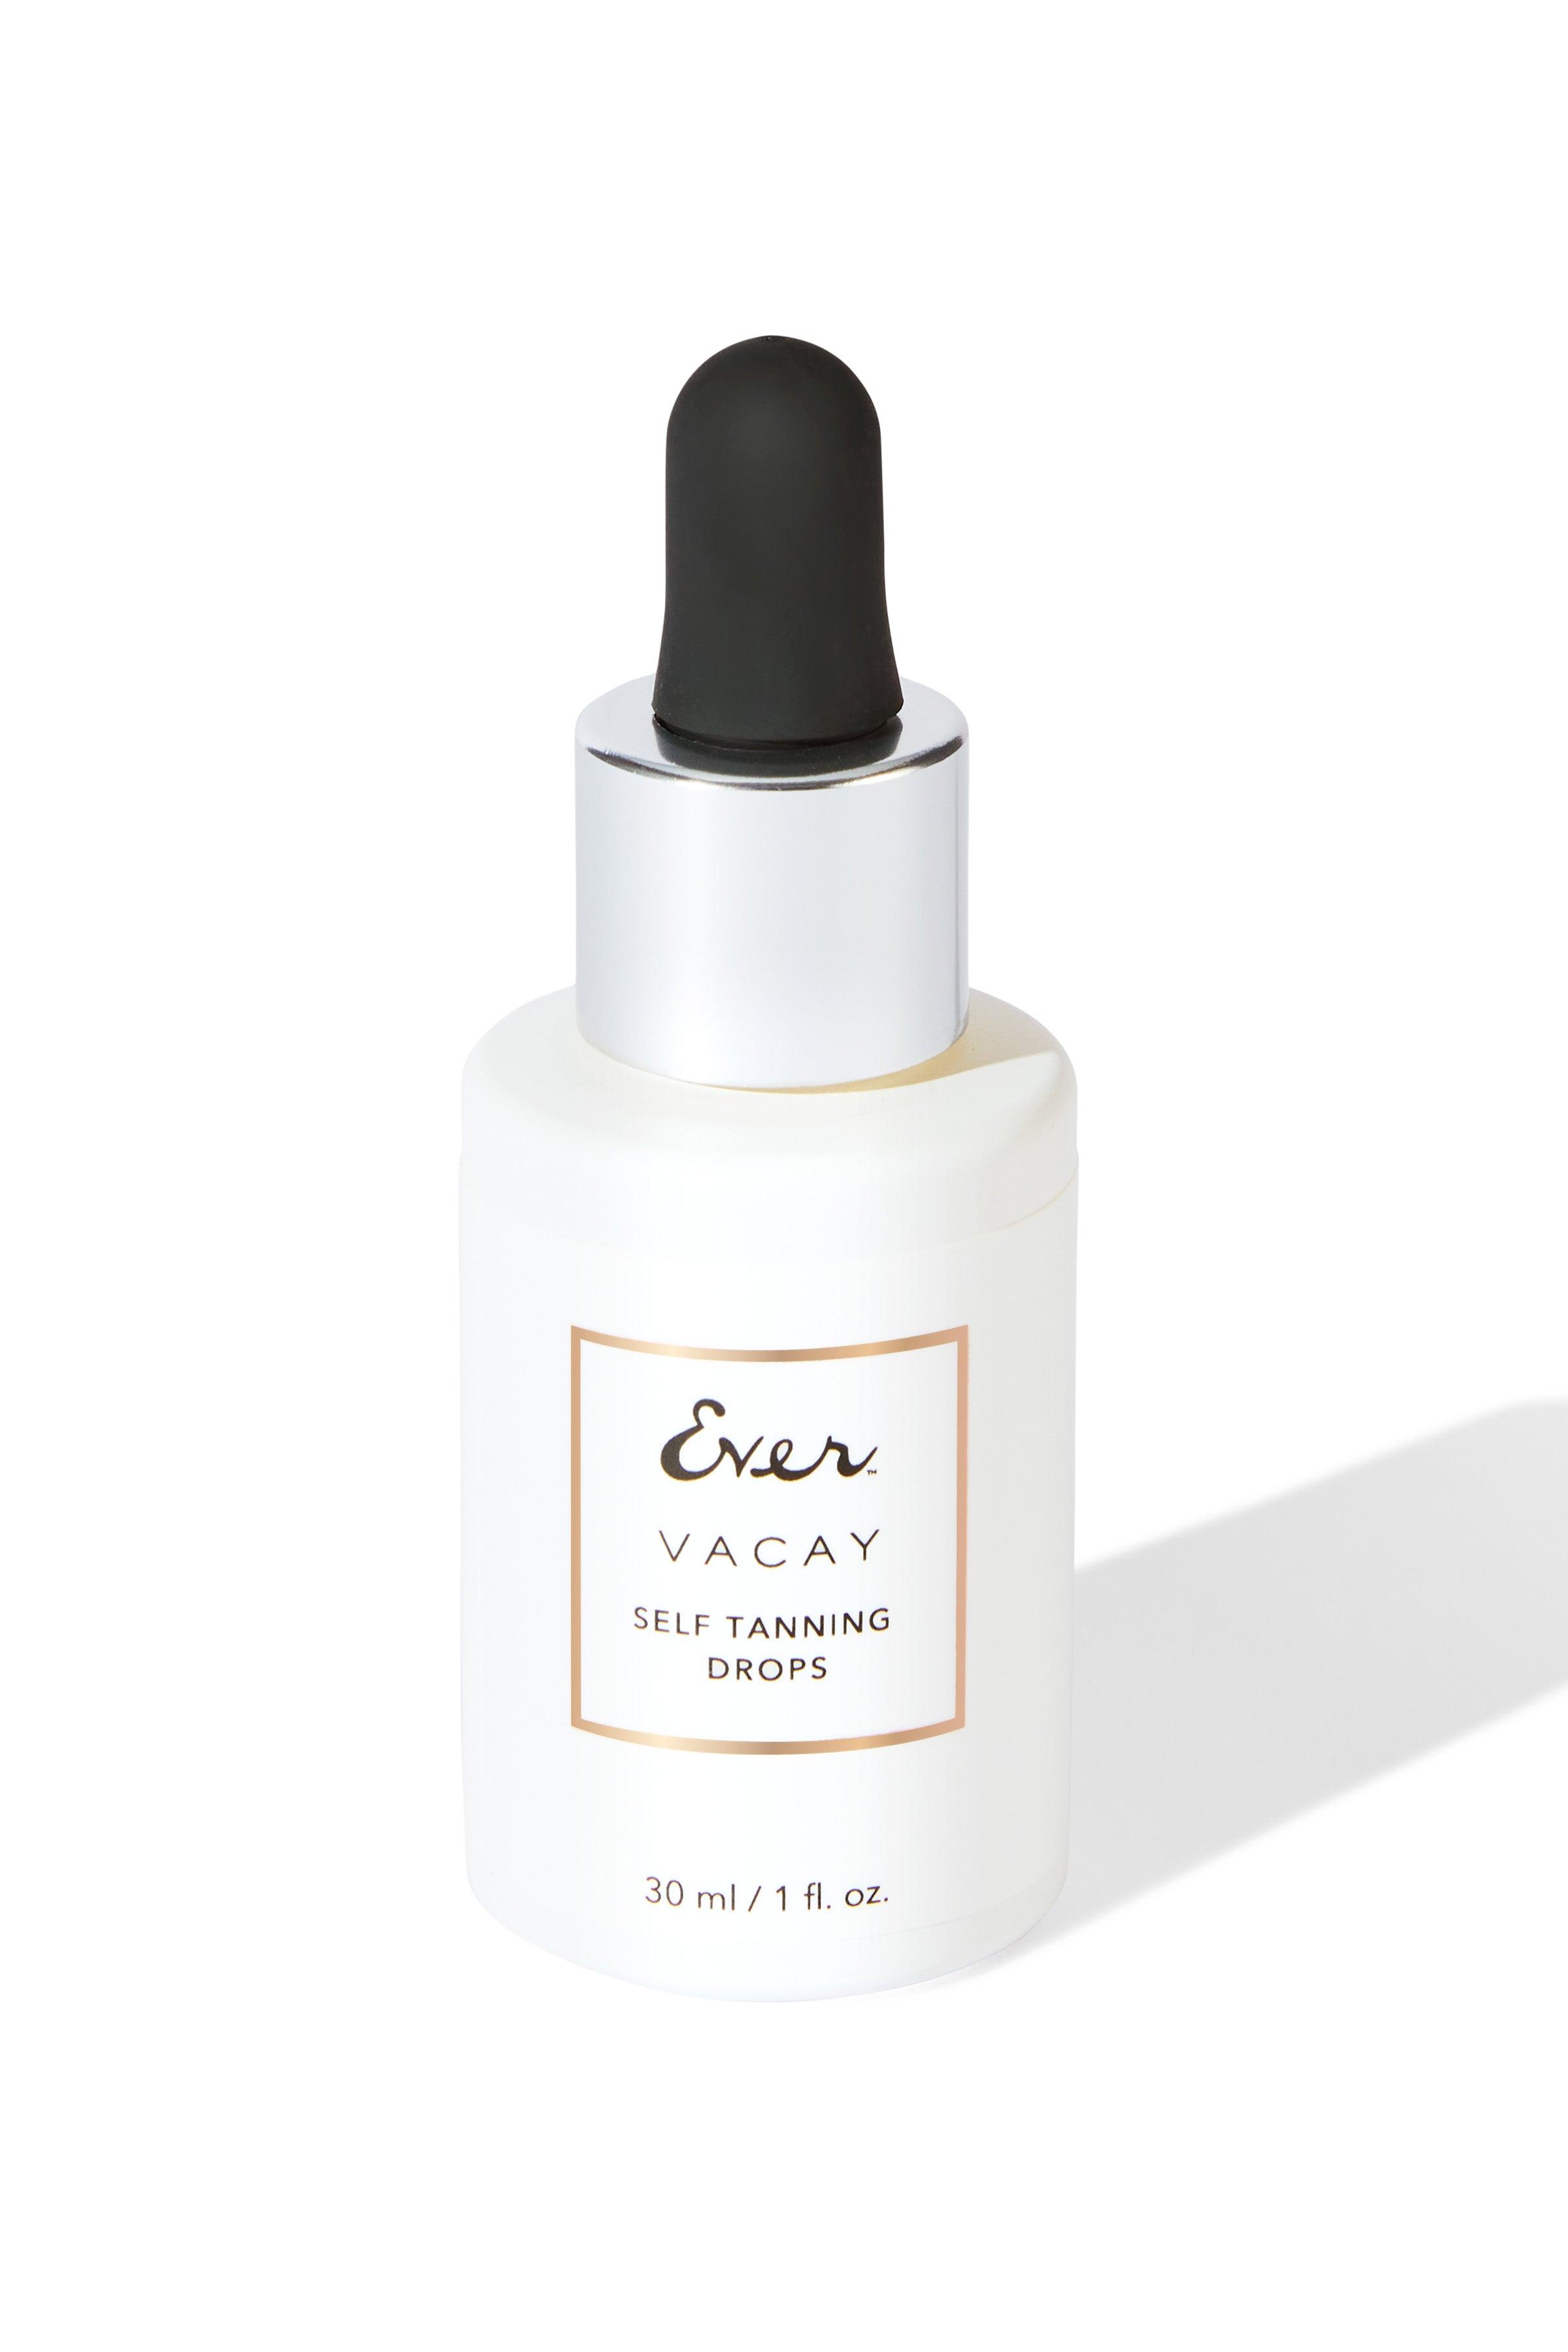 VACAY Self Tanning Drops – EVER Skincare